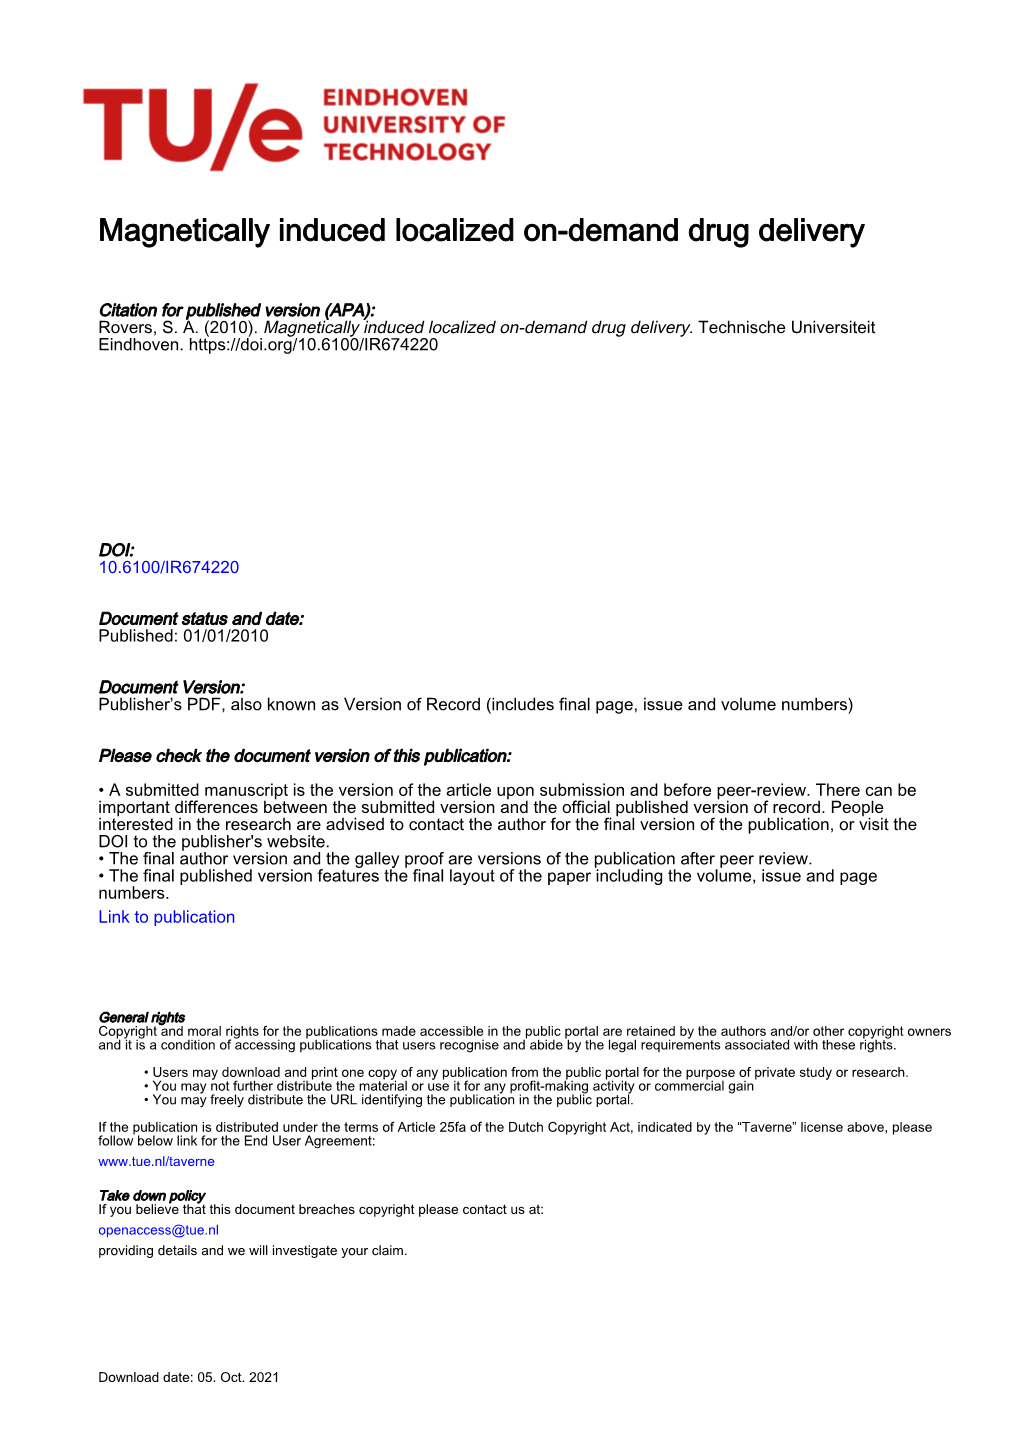 Magnetically Induced Localized On-Demand Drug Delivery